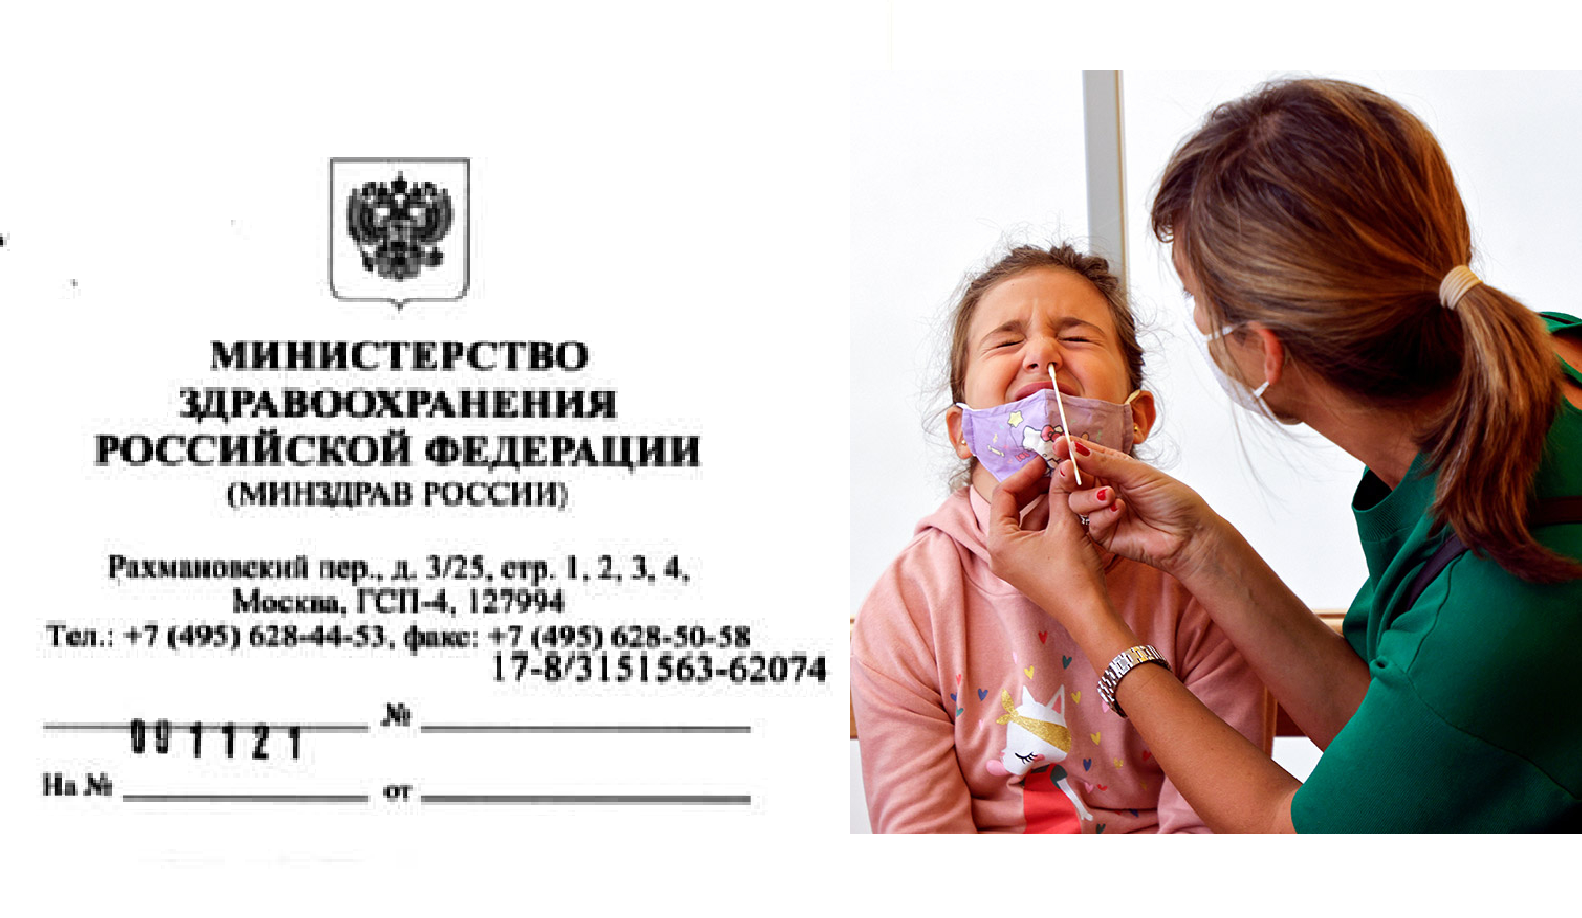 Biomaterial from children: the Ministry of Health and the Department of Education differ in their estimates